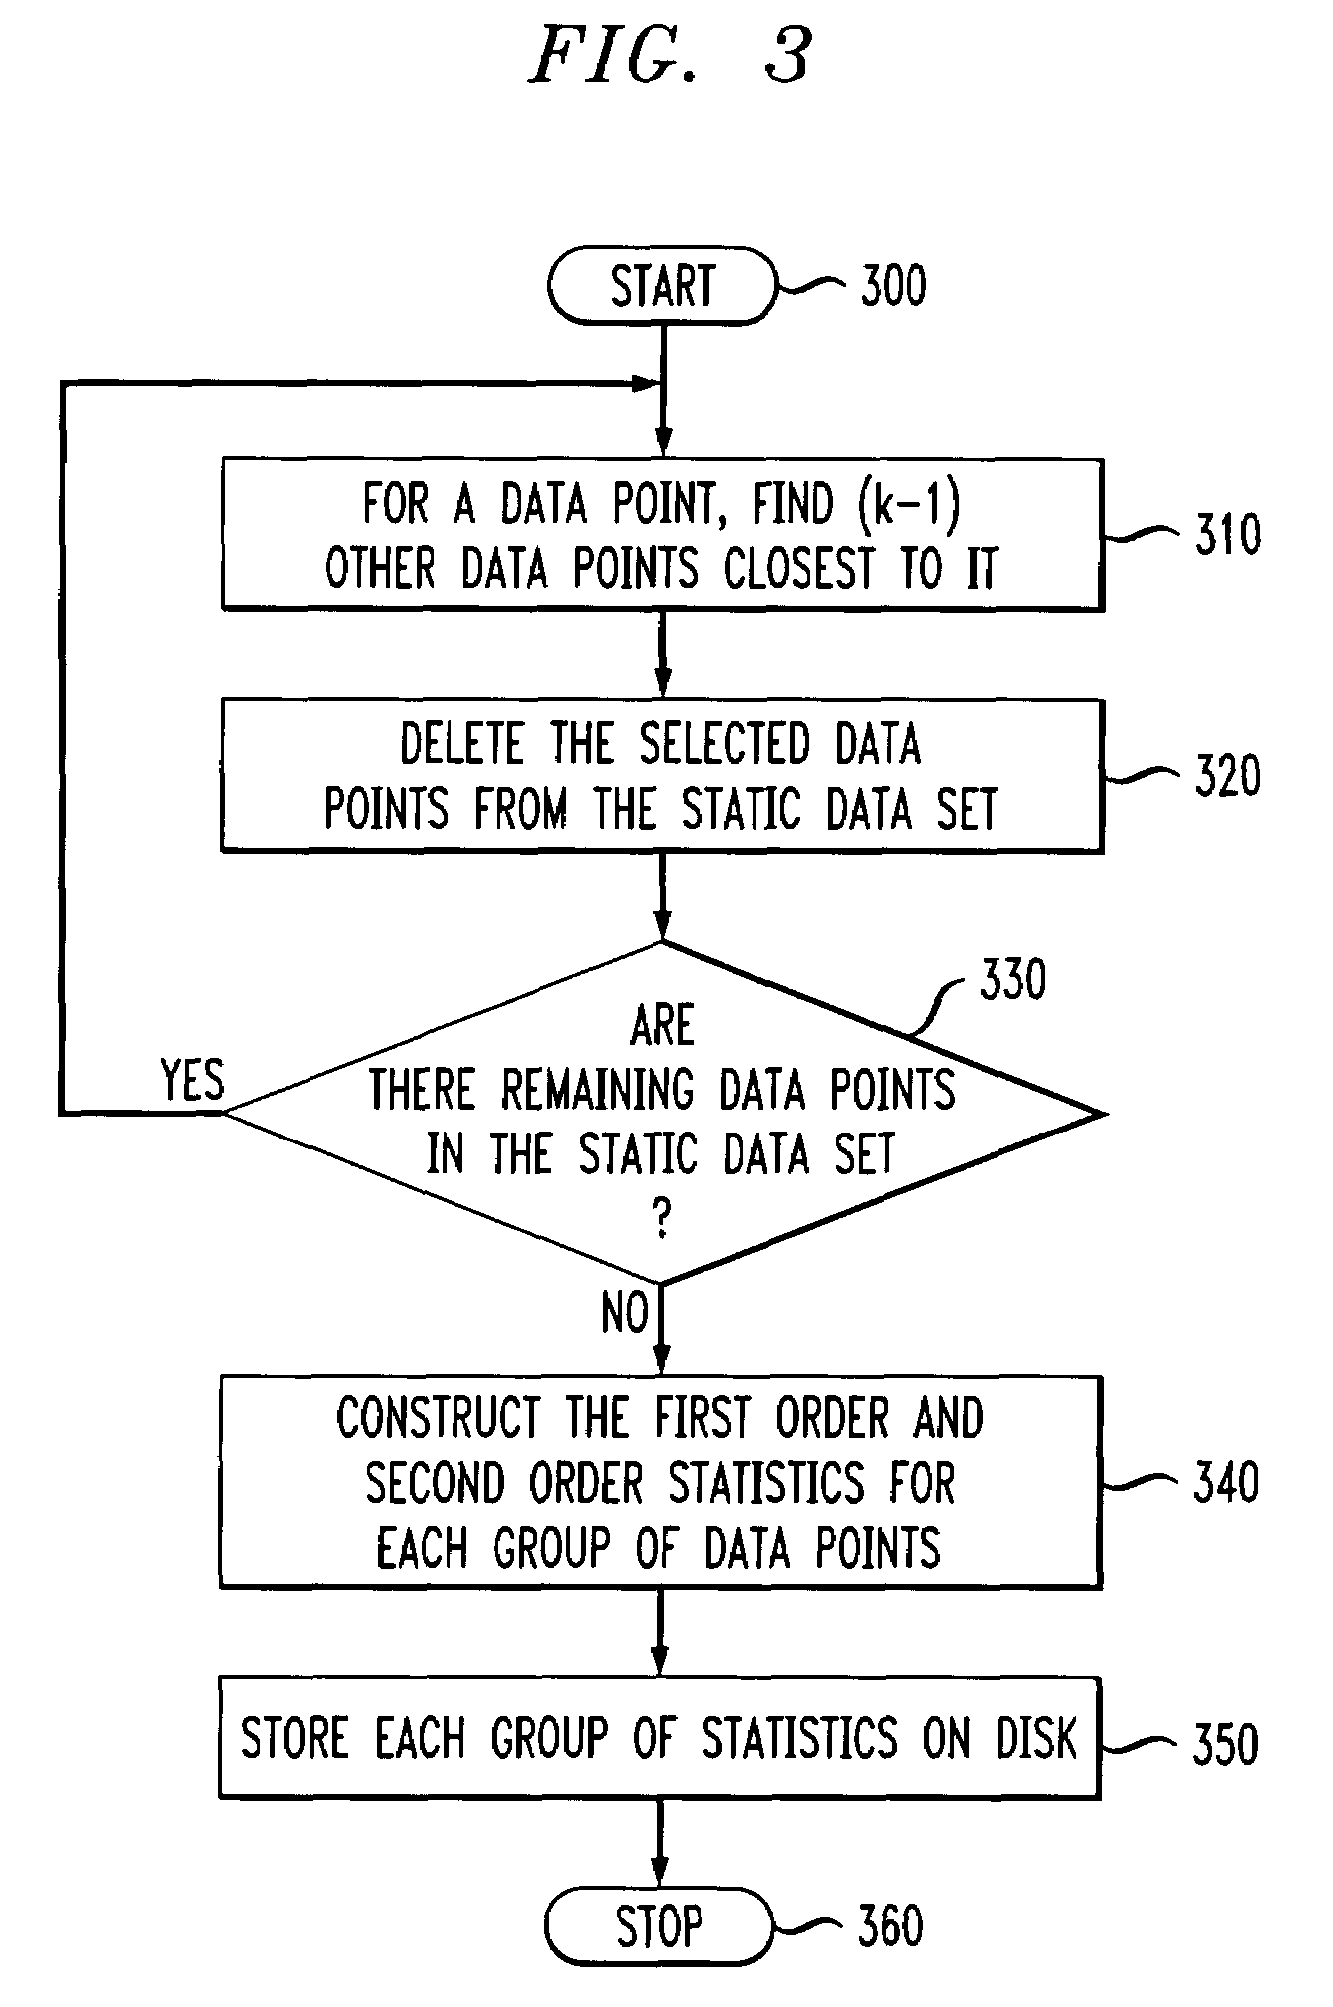 Methods and apparatus for privacy preserving data mining using statistical condensing approach